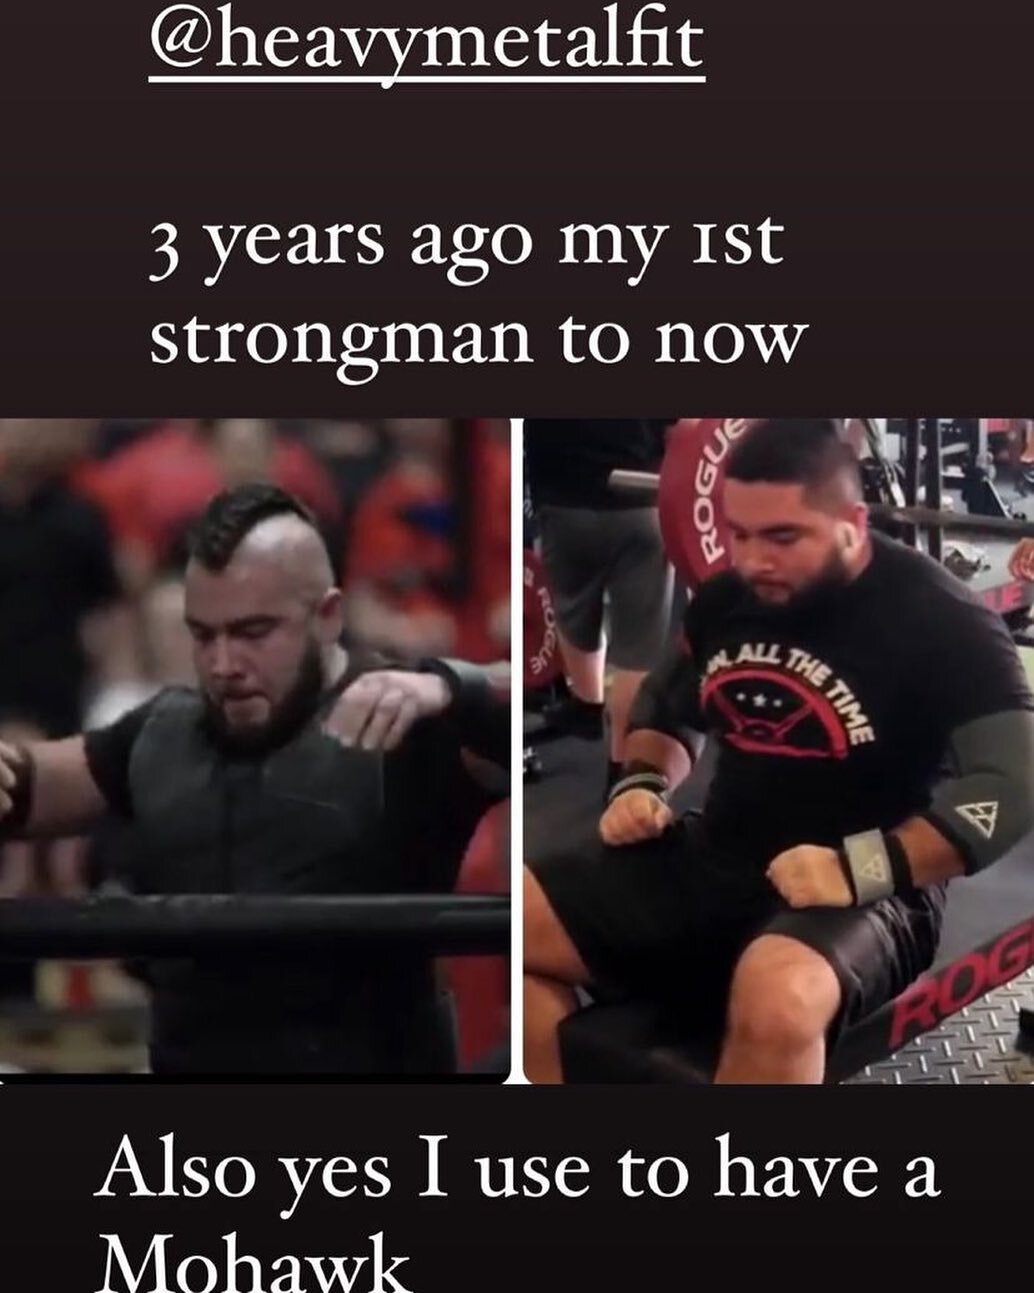 Happy to see you in Strognman all these years @thetexas_wolfman53 ! Keep it going! @heavymetalfit #roizo #strongman #determination